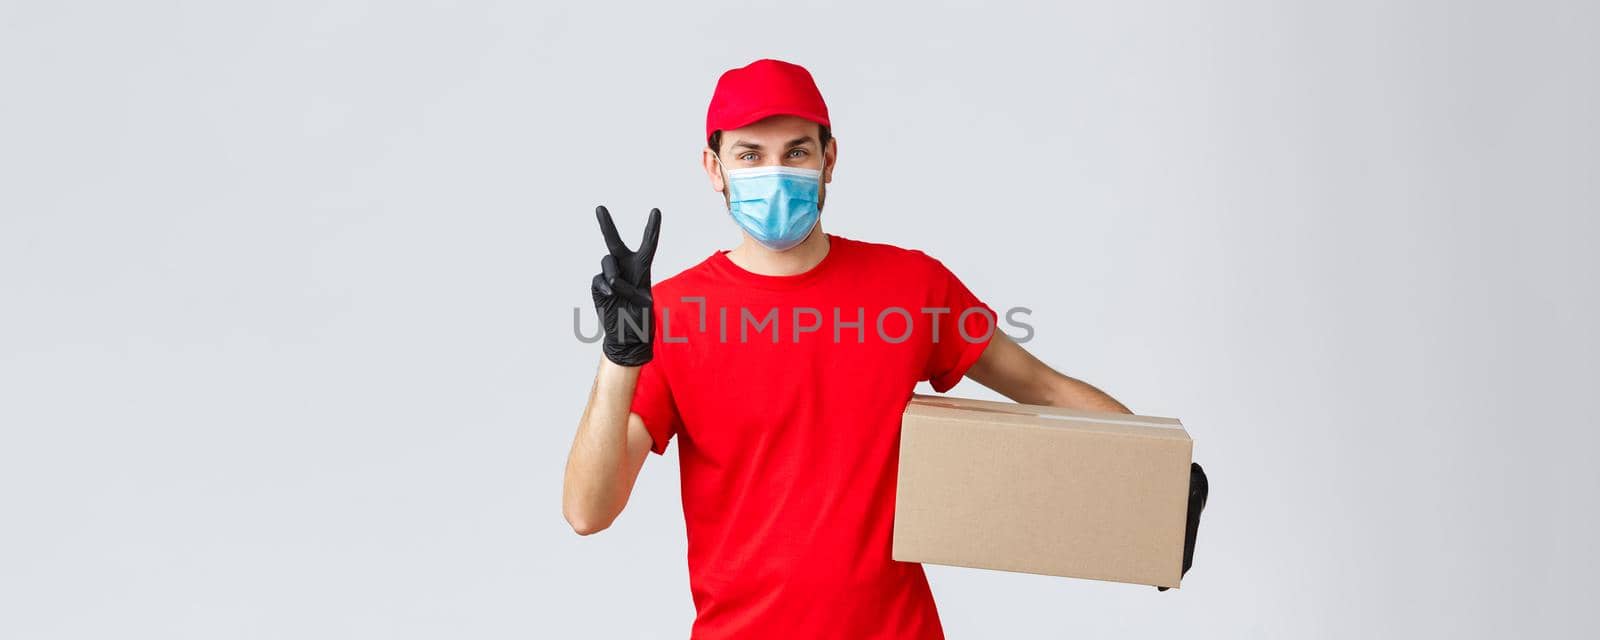 Packages and parcels delivery, covid-19 quarantine delivery, transfer orders. Friendly courier in red uniform, face mask and gloves, deliver order to client, holding box, show peace sign.